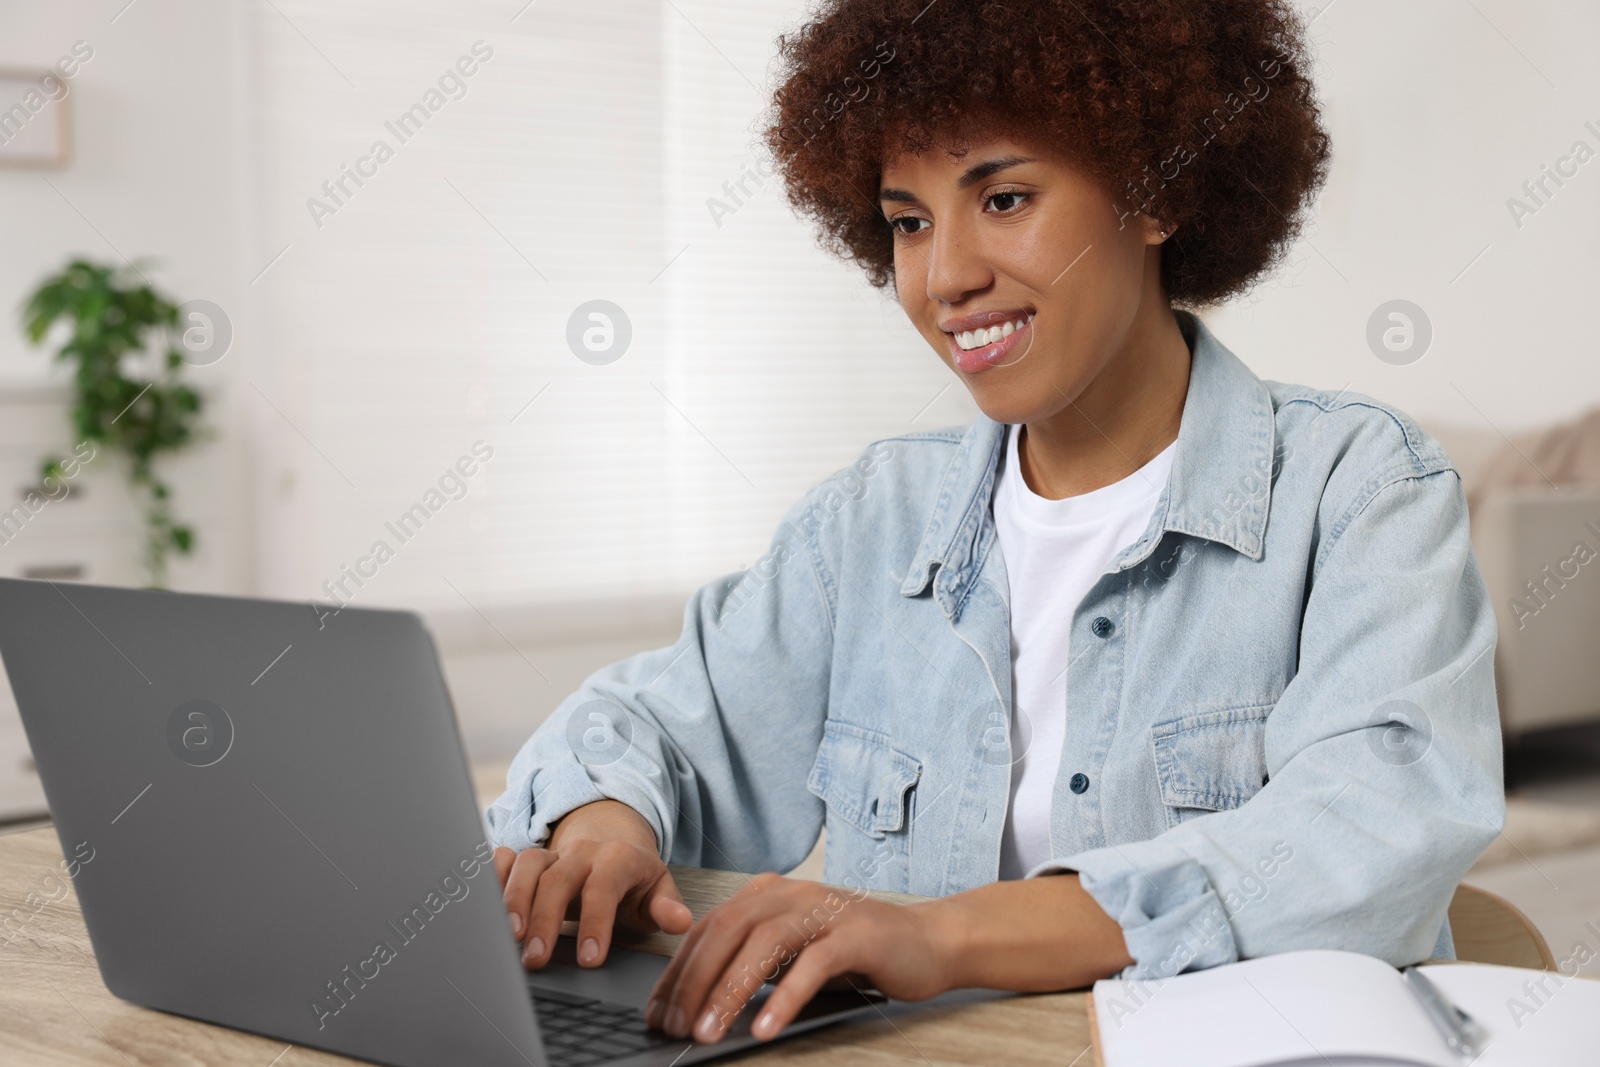 Photo of Young woman using laptop at wooden desk in room